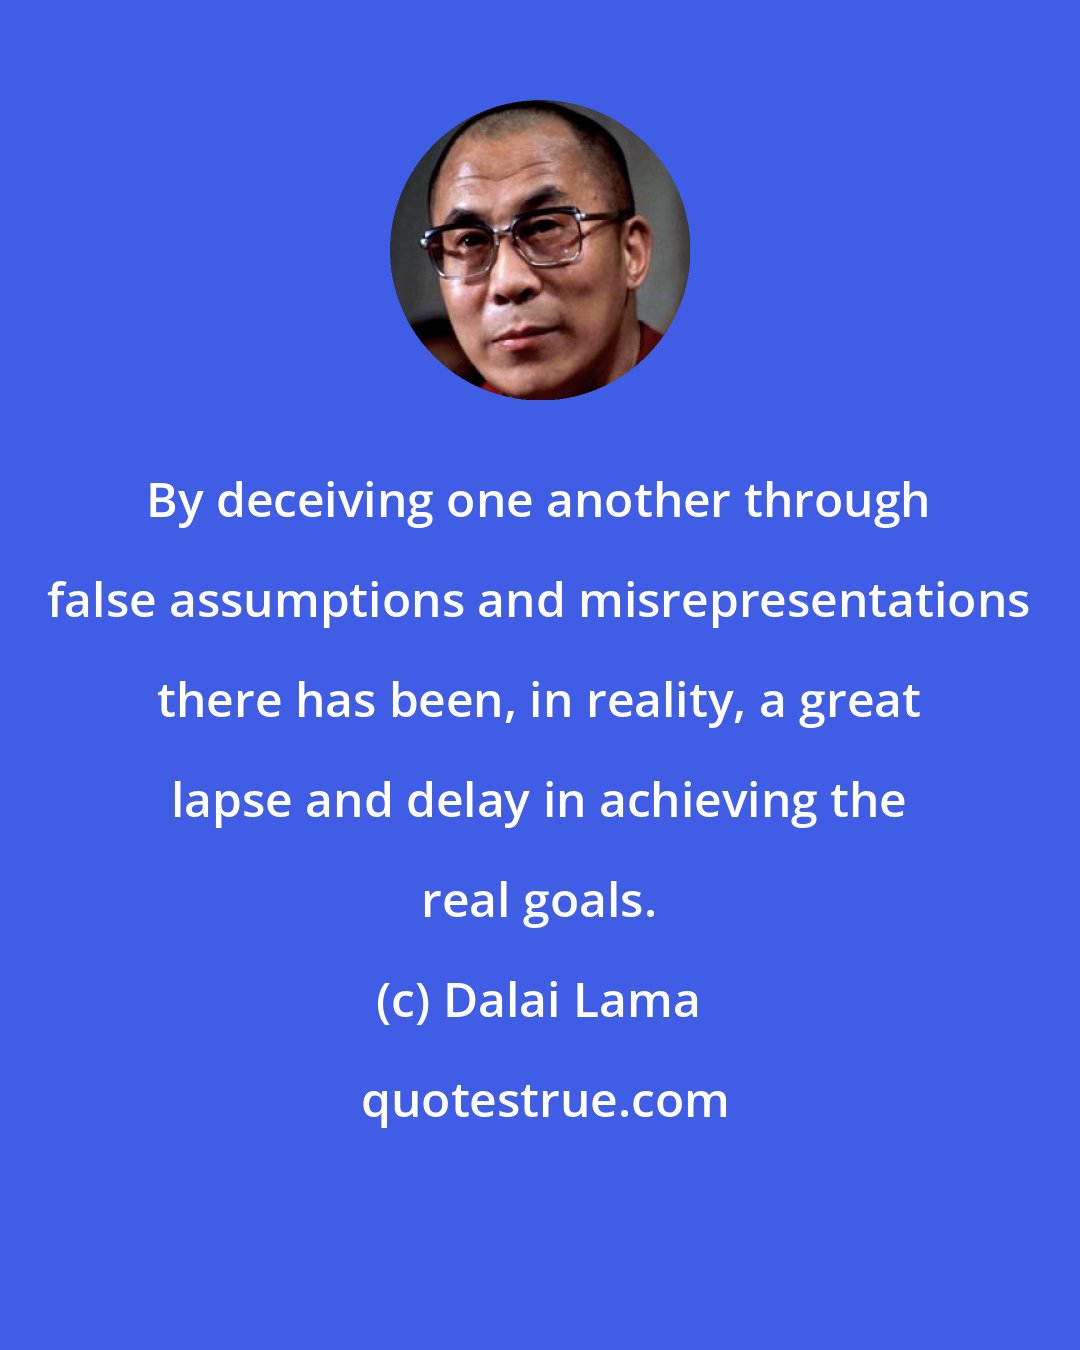 Dalai Lama: By deceiving one another through false assumptions and misrepresentations there has been, in reality, a great lapse and delay in achieving the real goals.